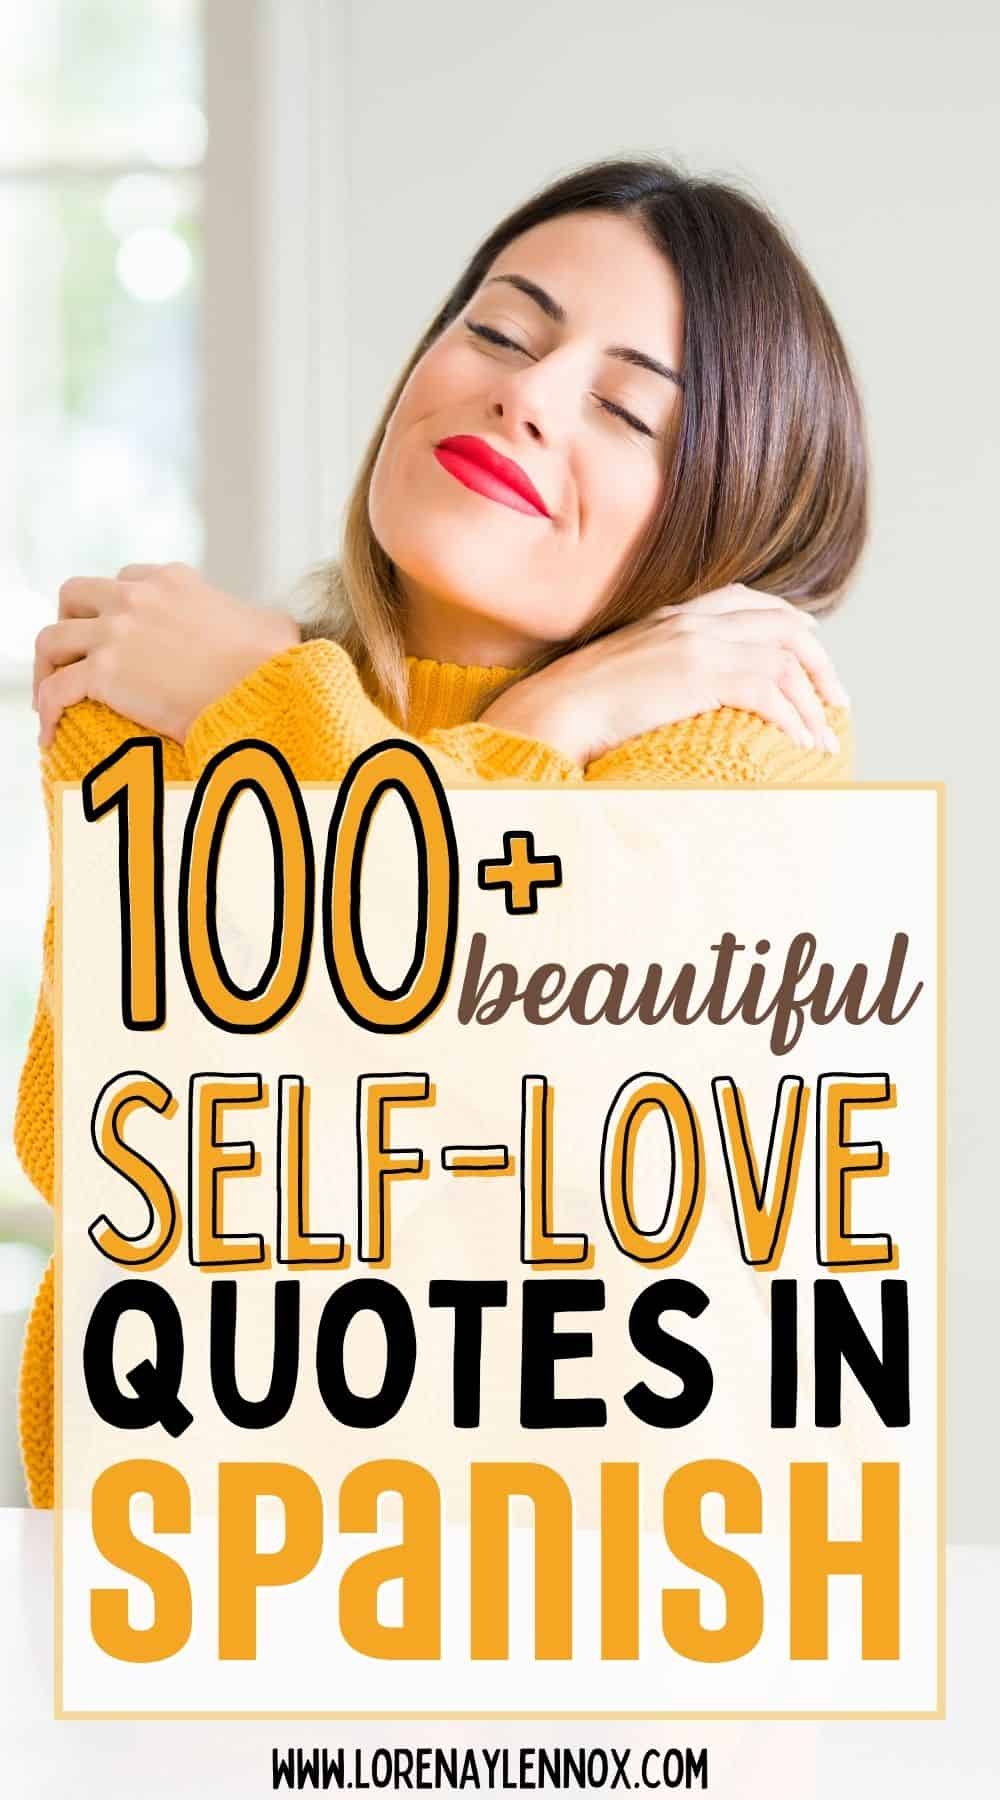 100 + Beautiful Self-Love Quotes in Spanish with English Translation